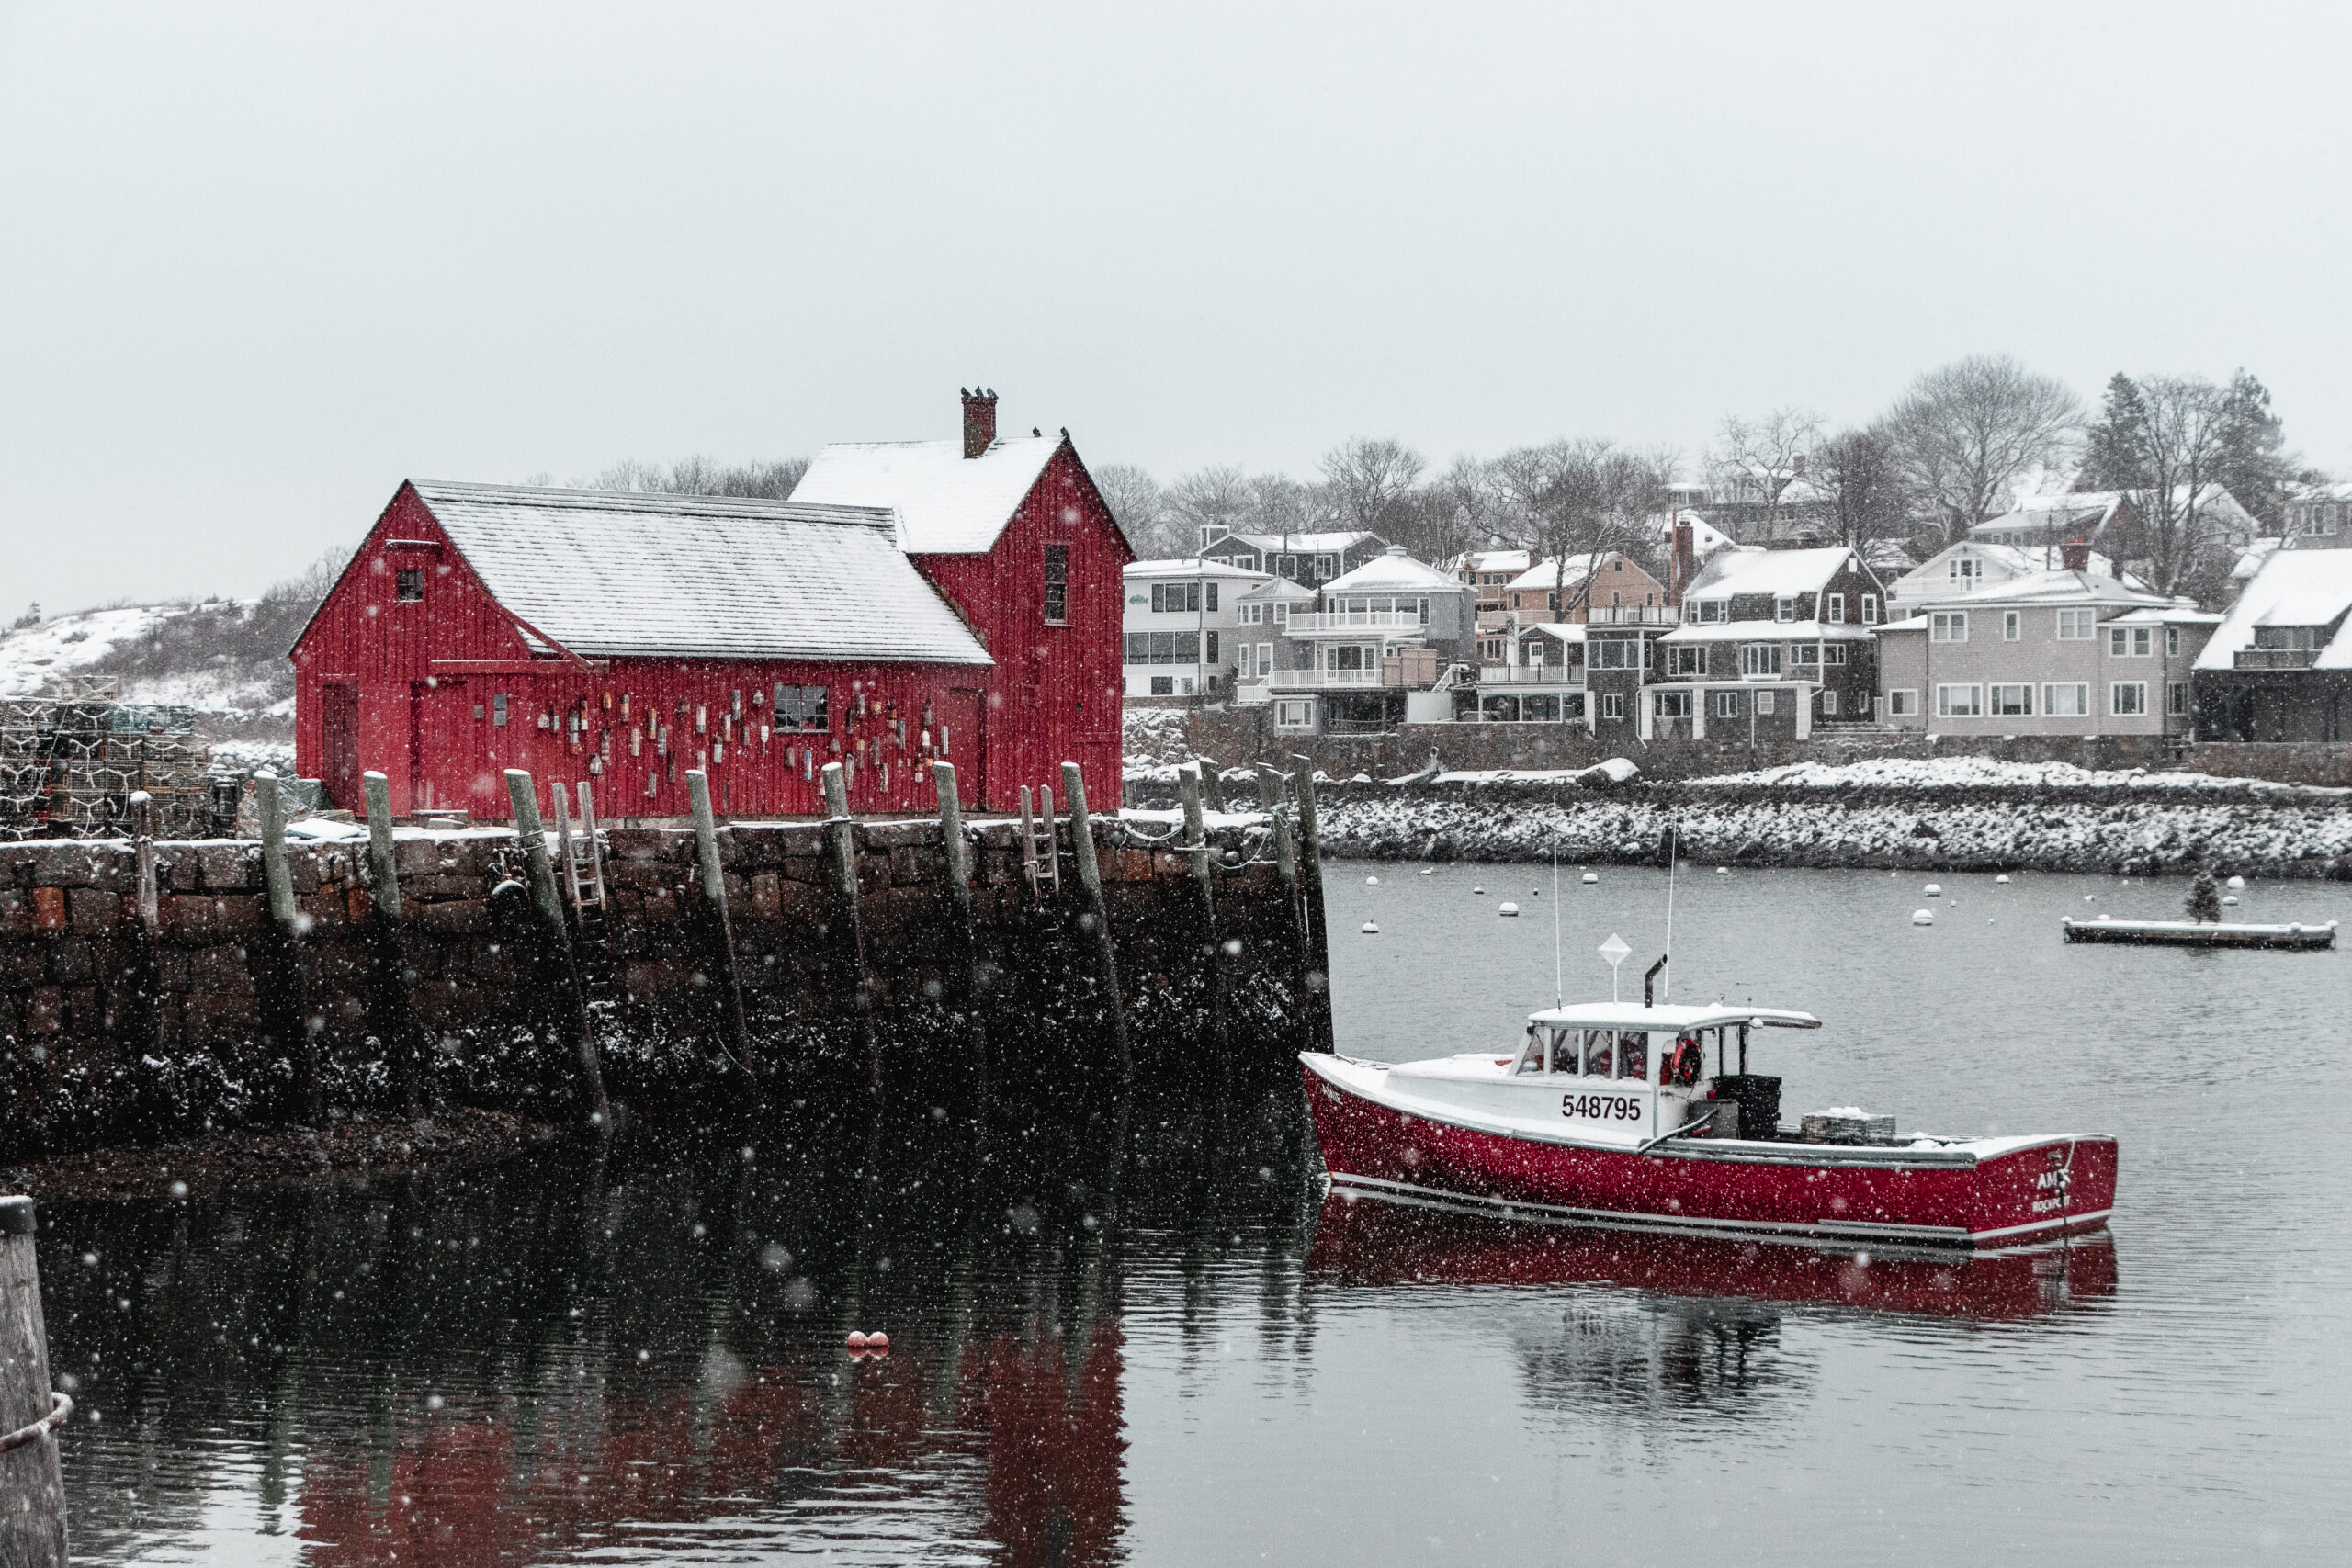 Snowflakes in the Harbor